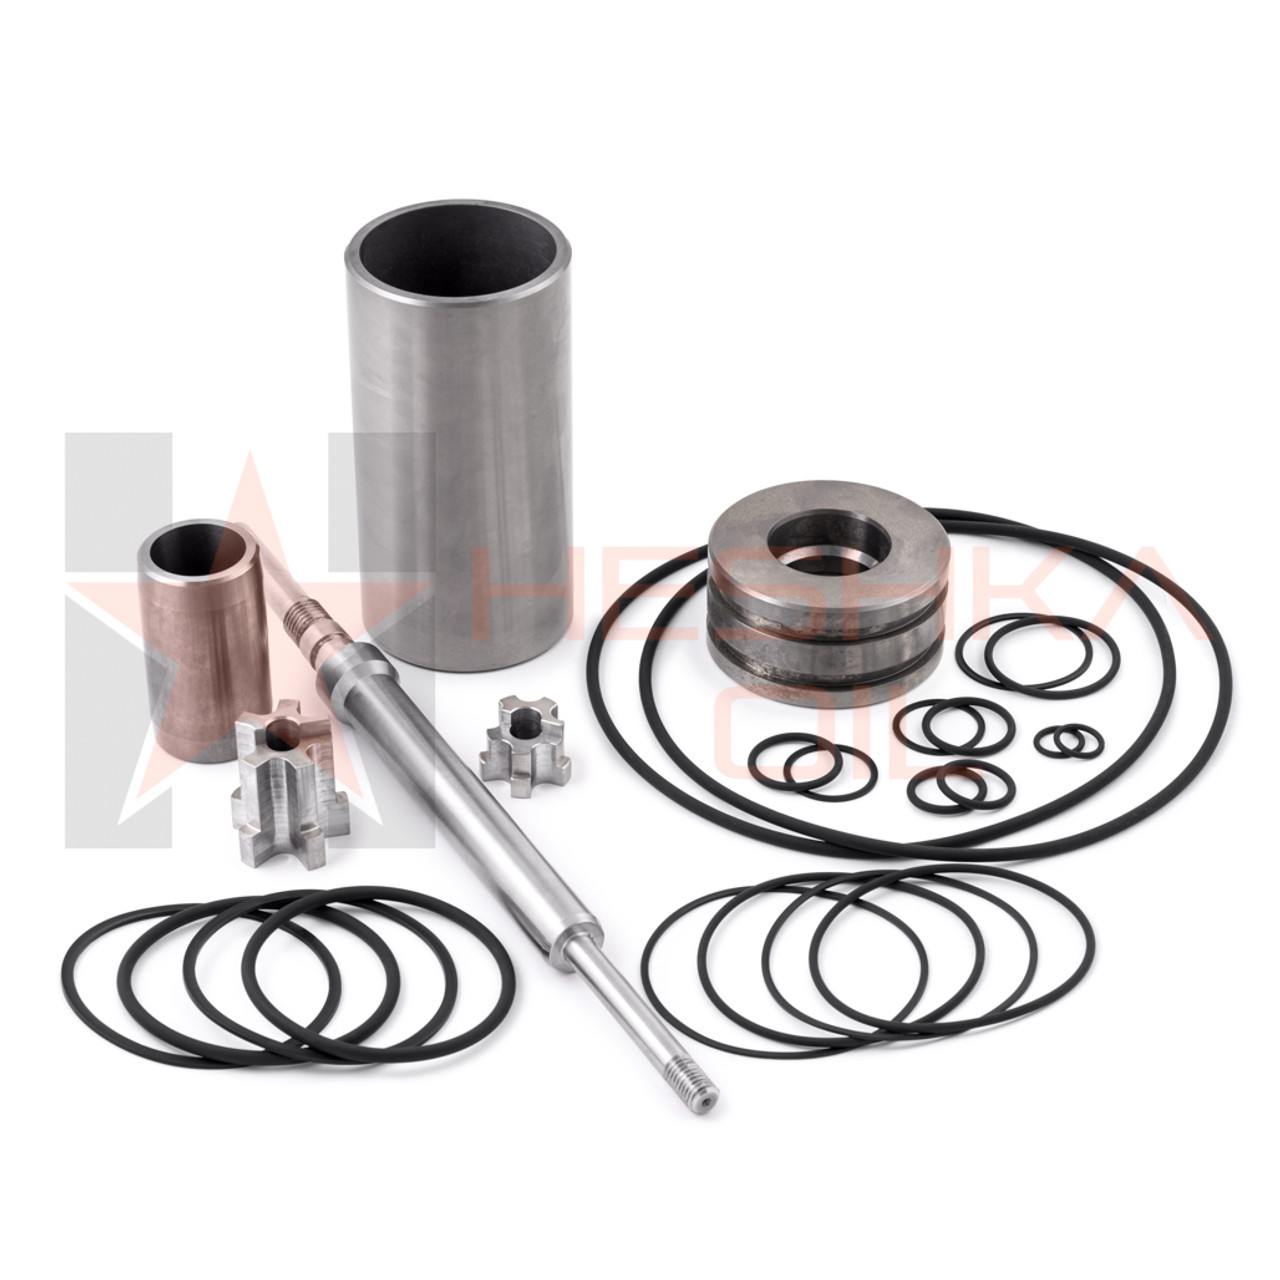 Order Repair Kits the Cameron Style Hydraulic Drilling Choke Online – Purchase Online from Heshka Oil